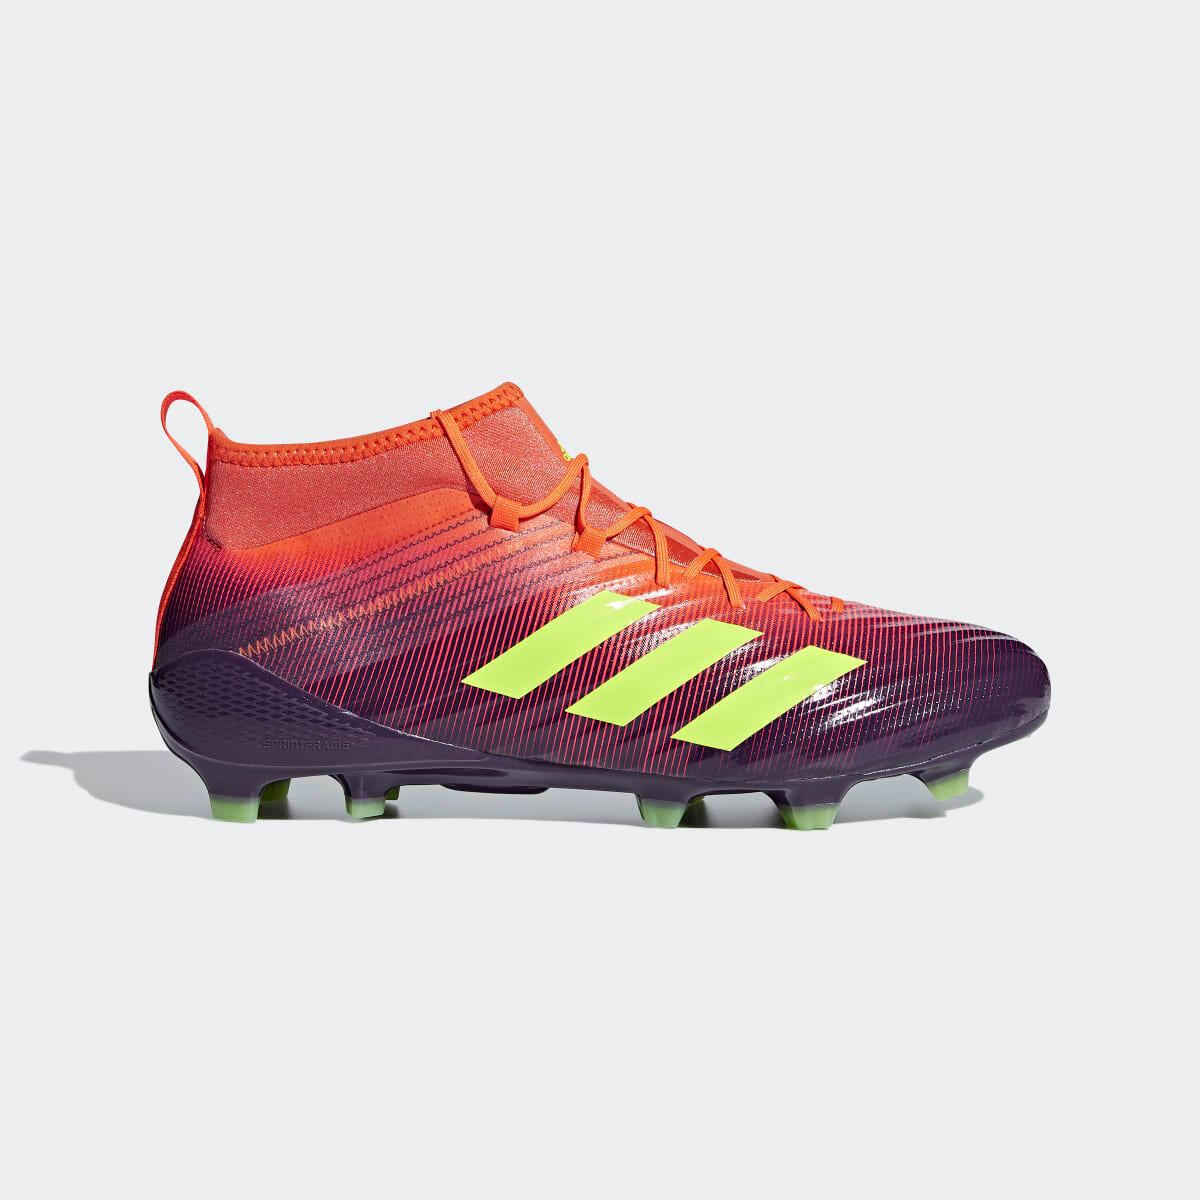 Adidas Predator Flare Firm Ground Rugby Boots 1/7